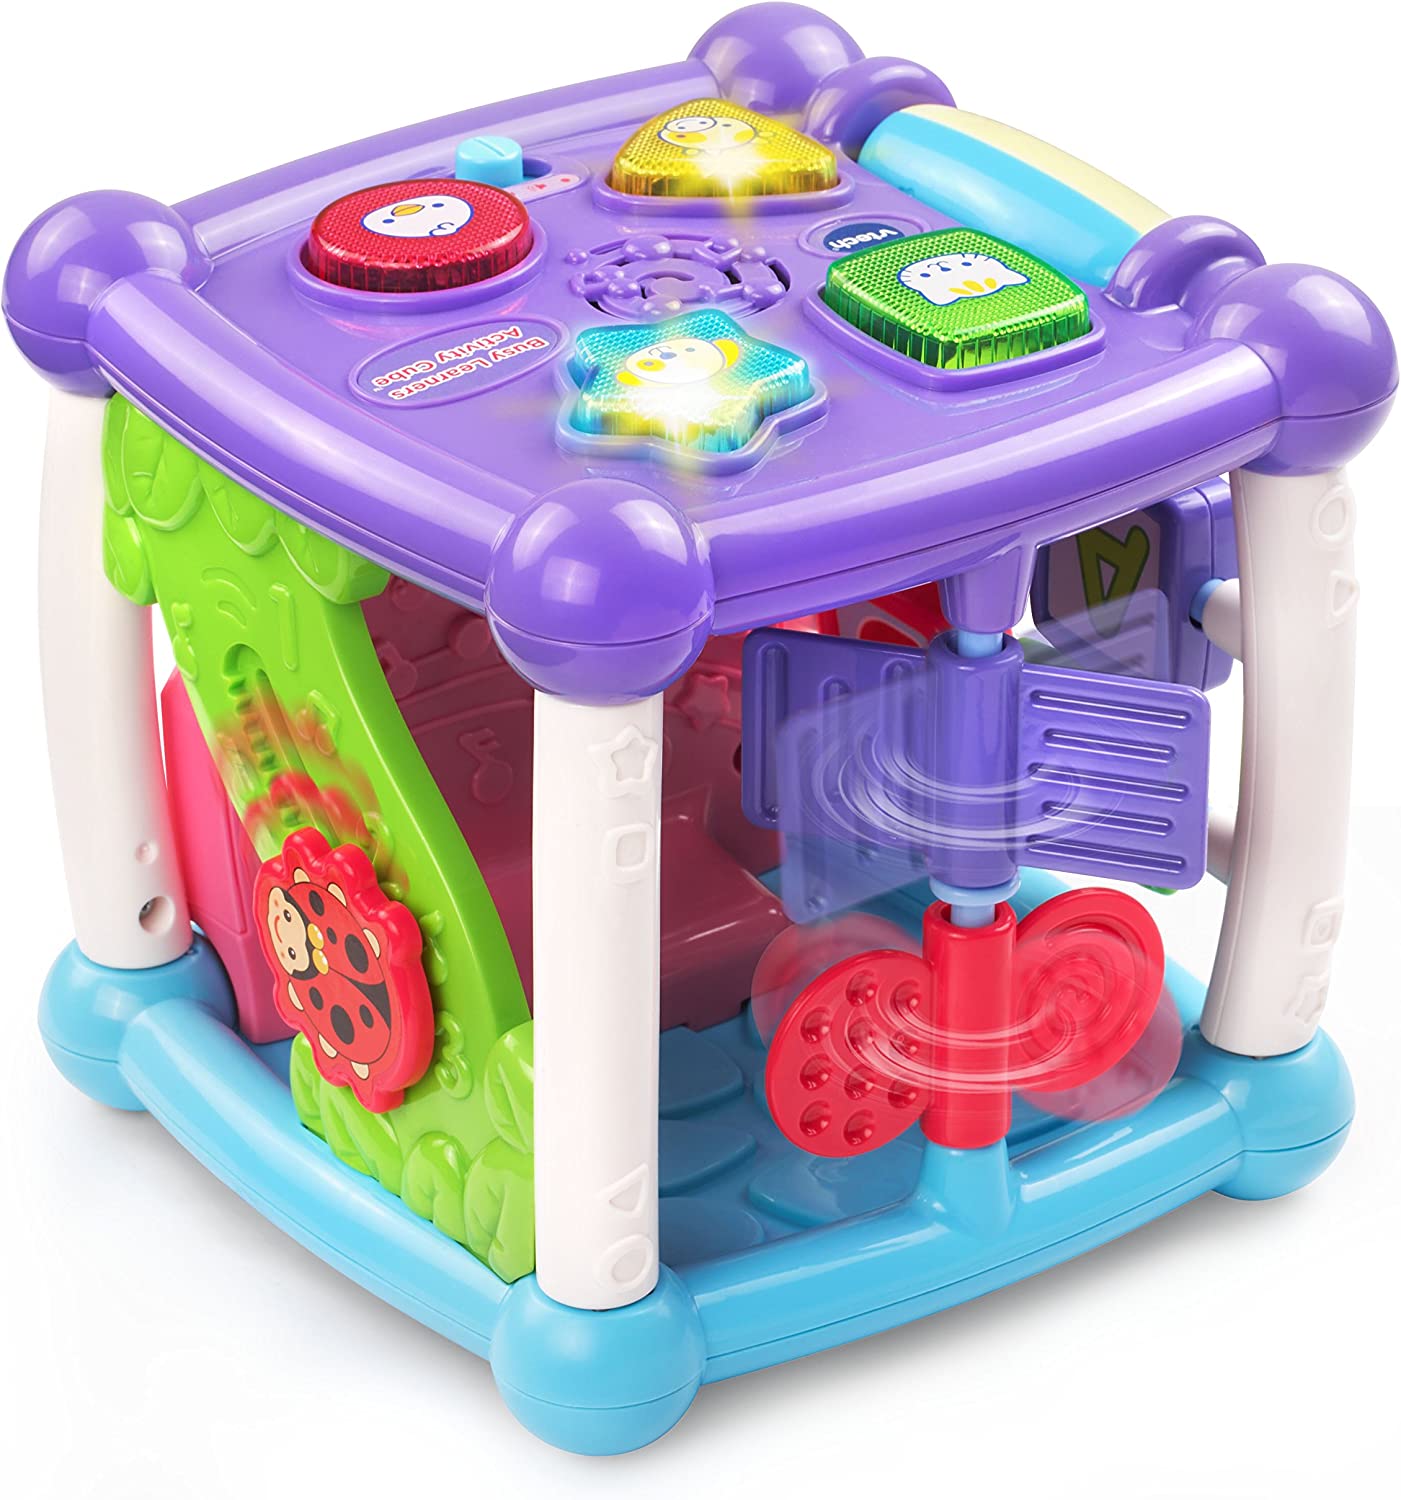 VTech Busy Learners Activity Cube, Purple - with 5 sides of play encourage discovery and exploration